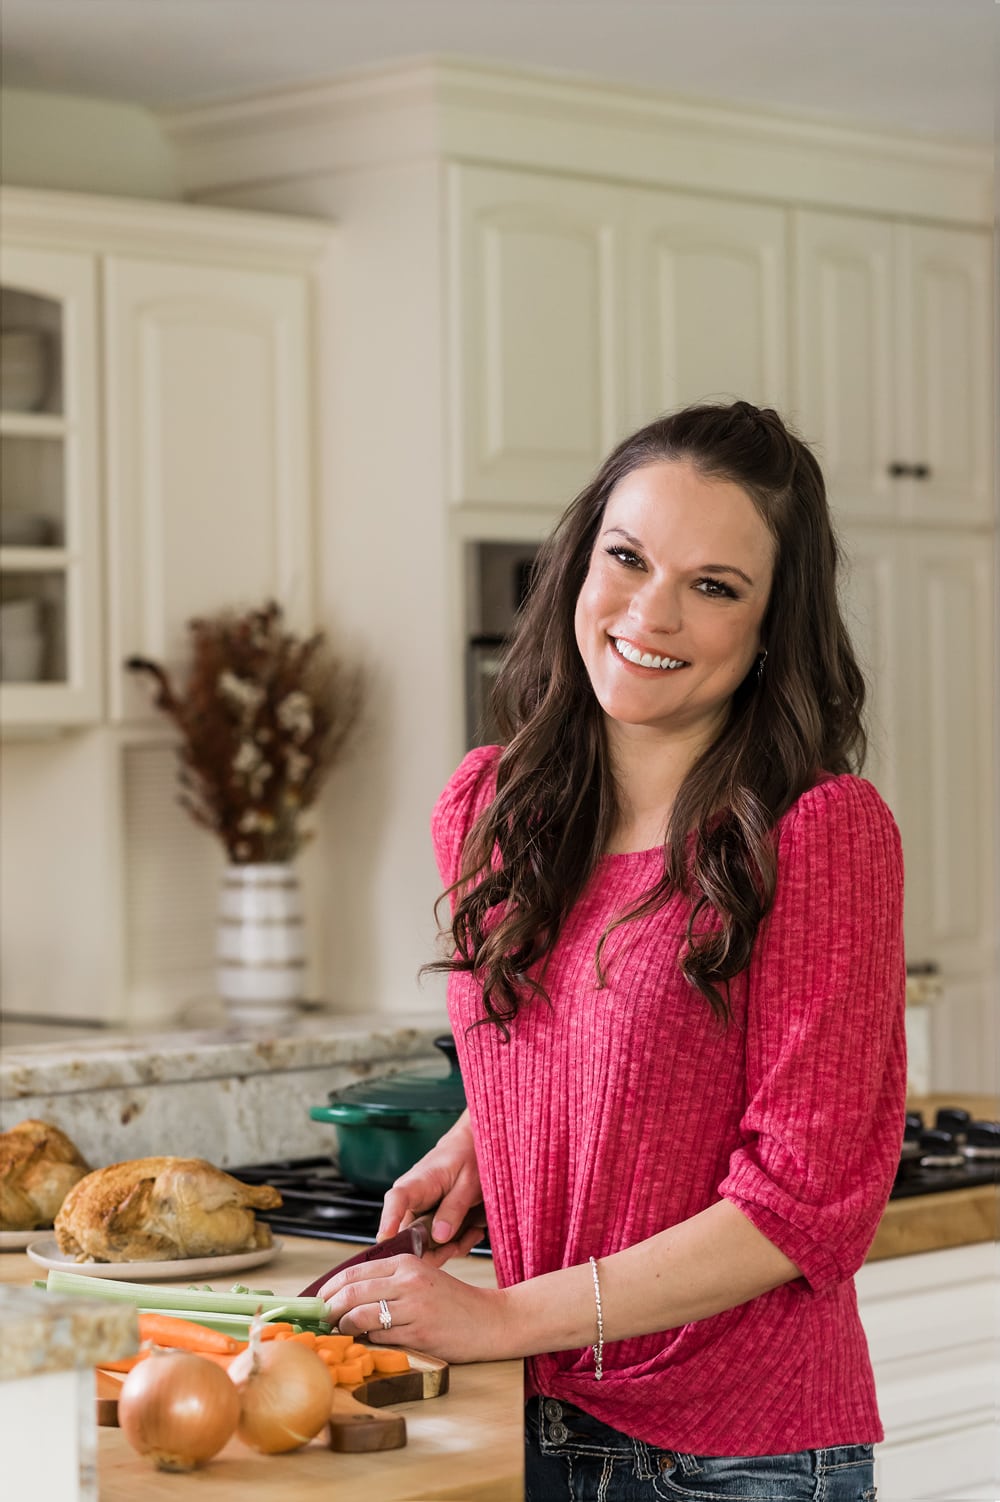 A picture of The Cozy Cook, Stephanie Melchione, cooking in her kitchen.